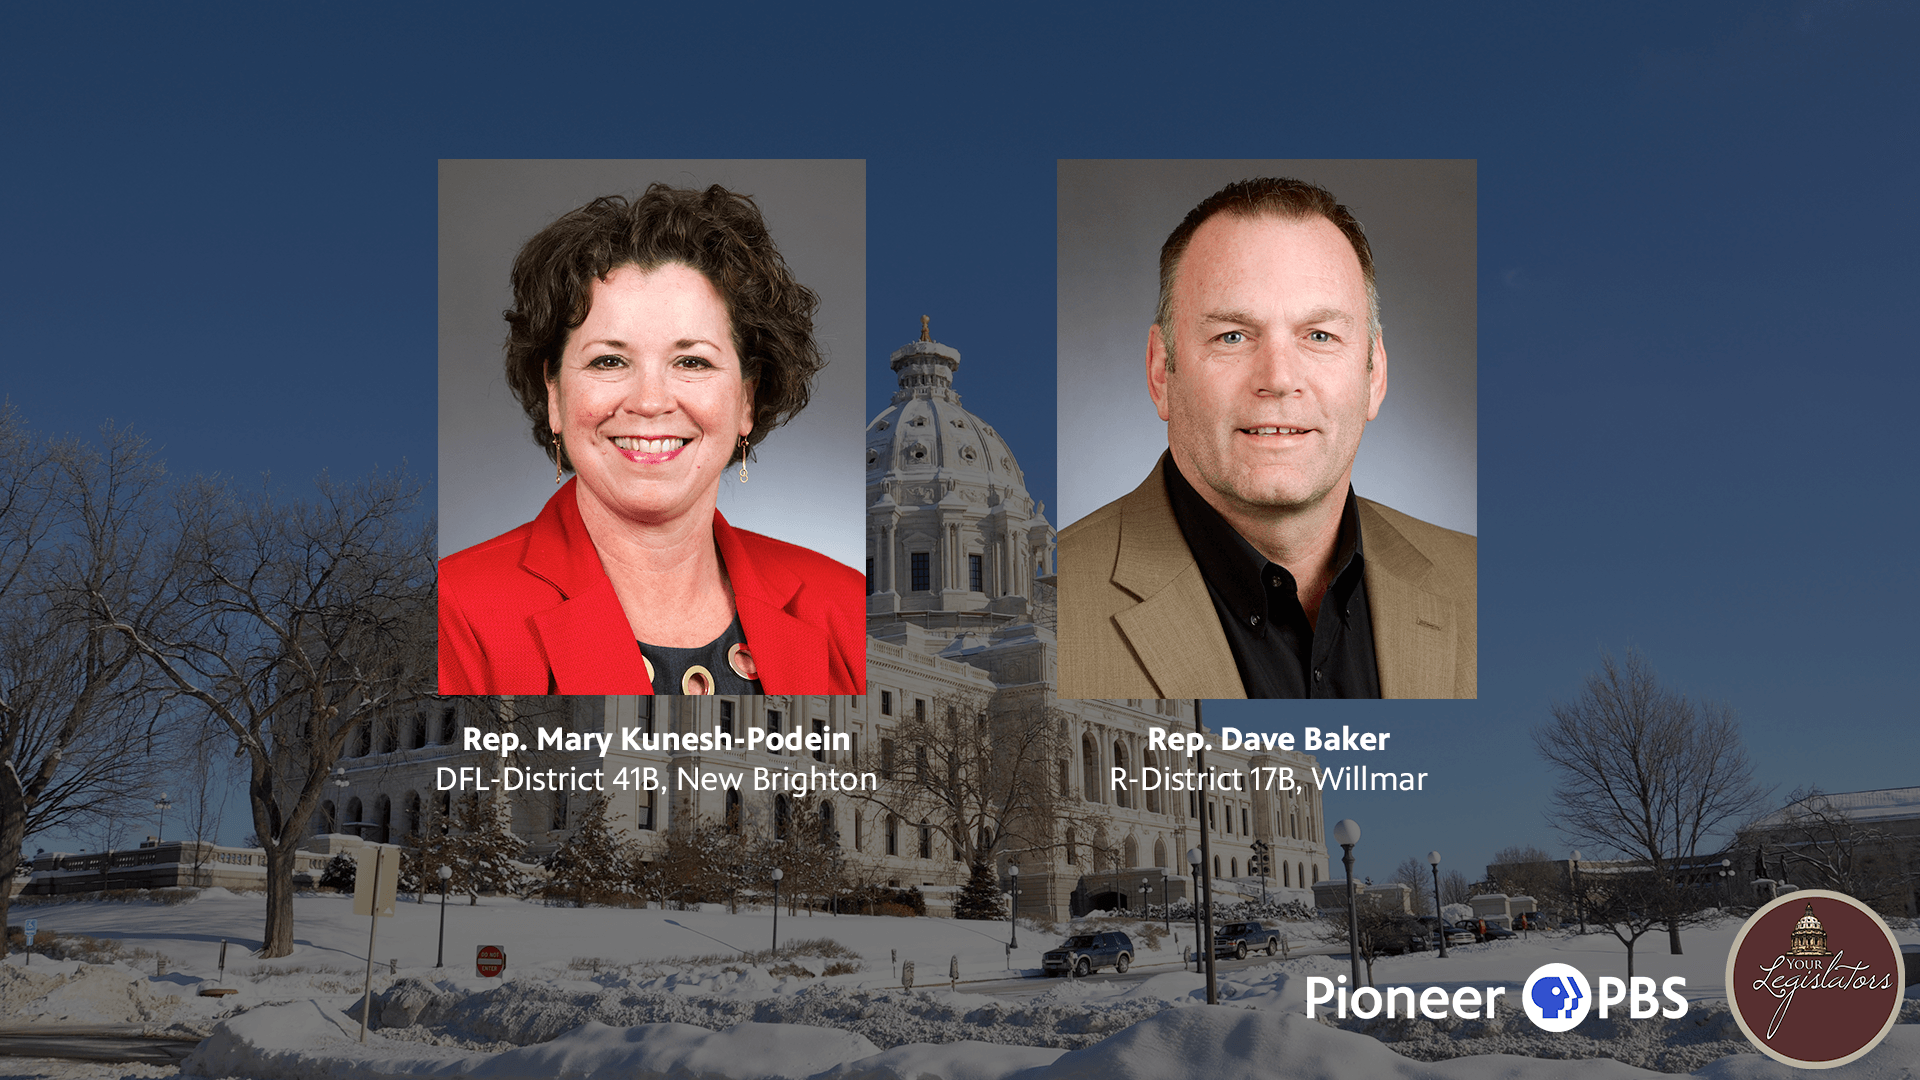 Rep. Dave Baker (R) and Rep. Mary Kunesh-Podein (DFL).